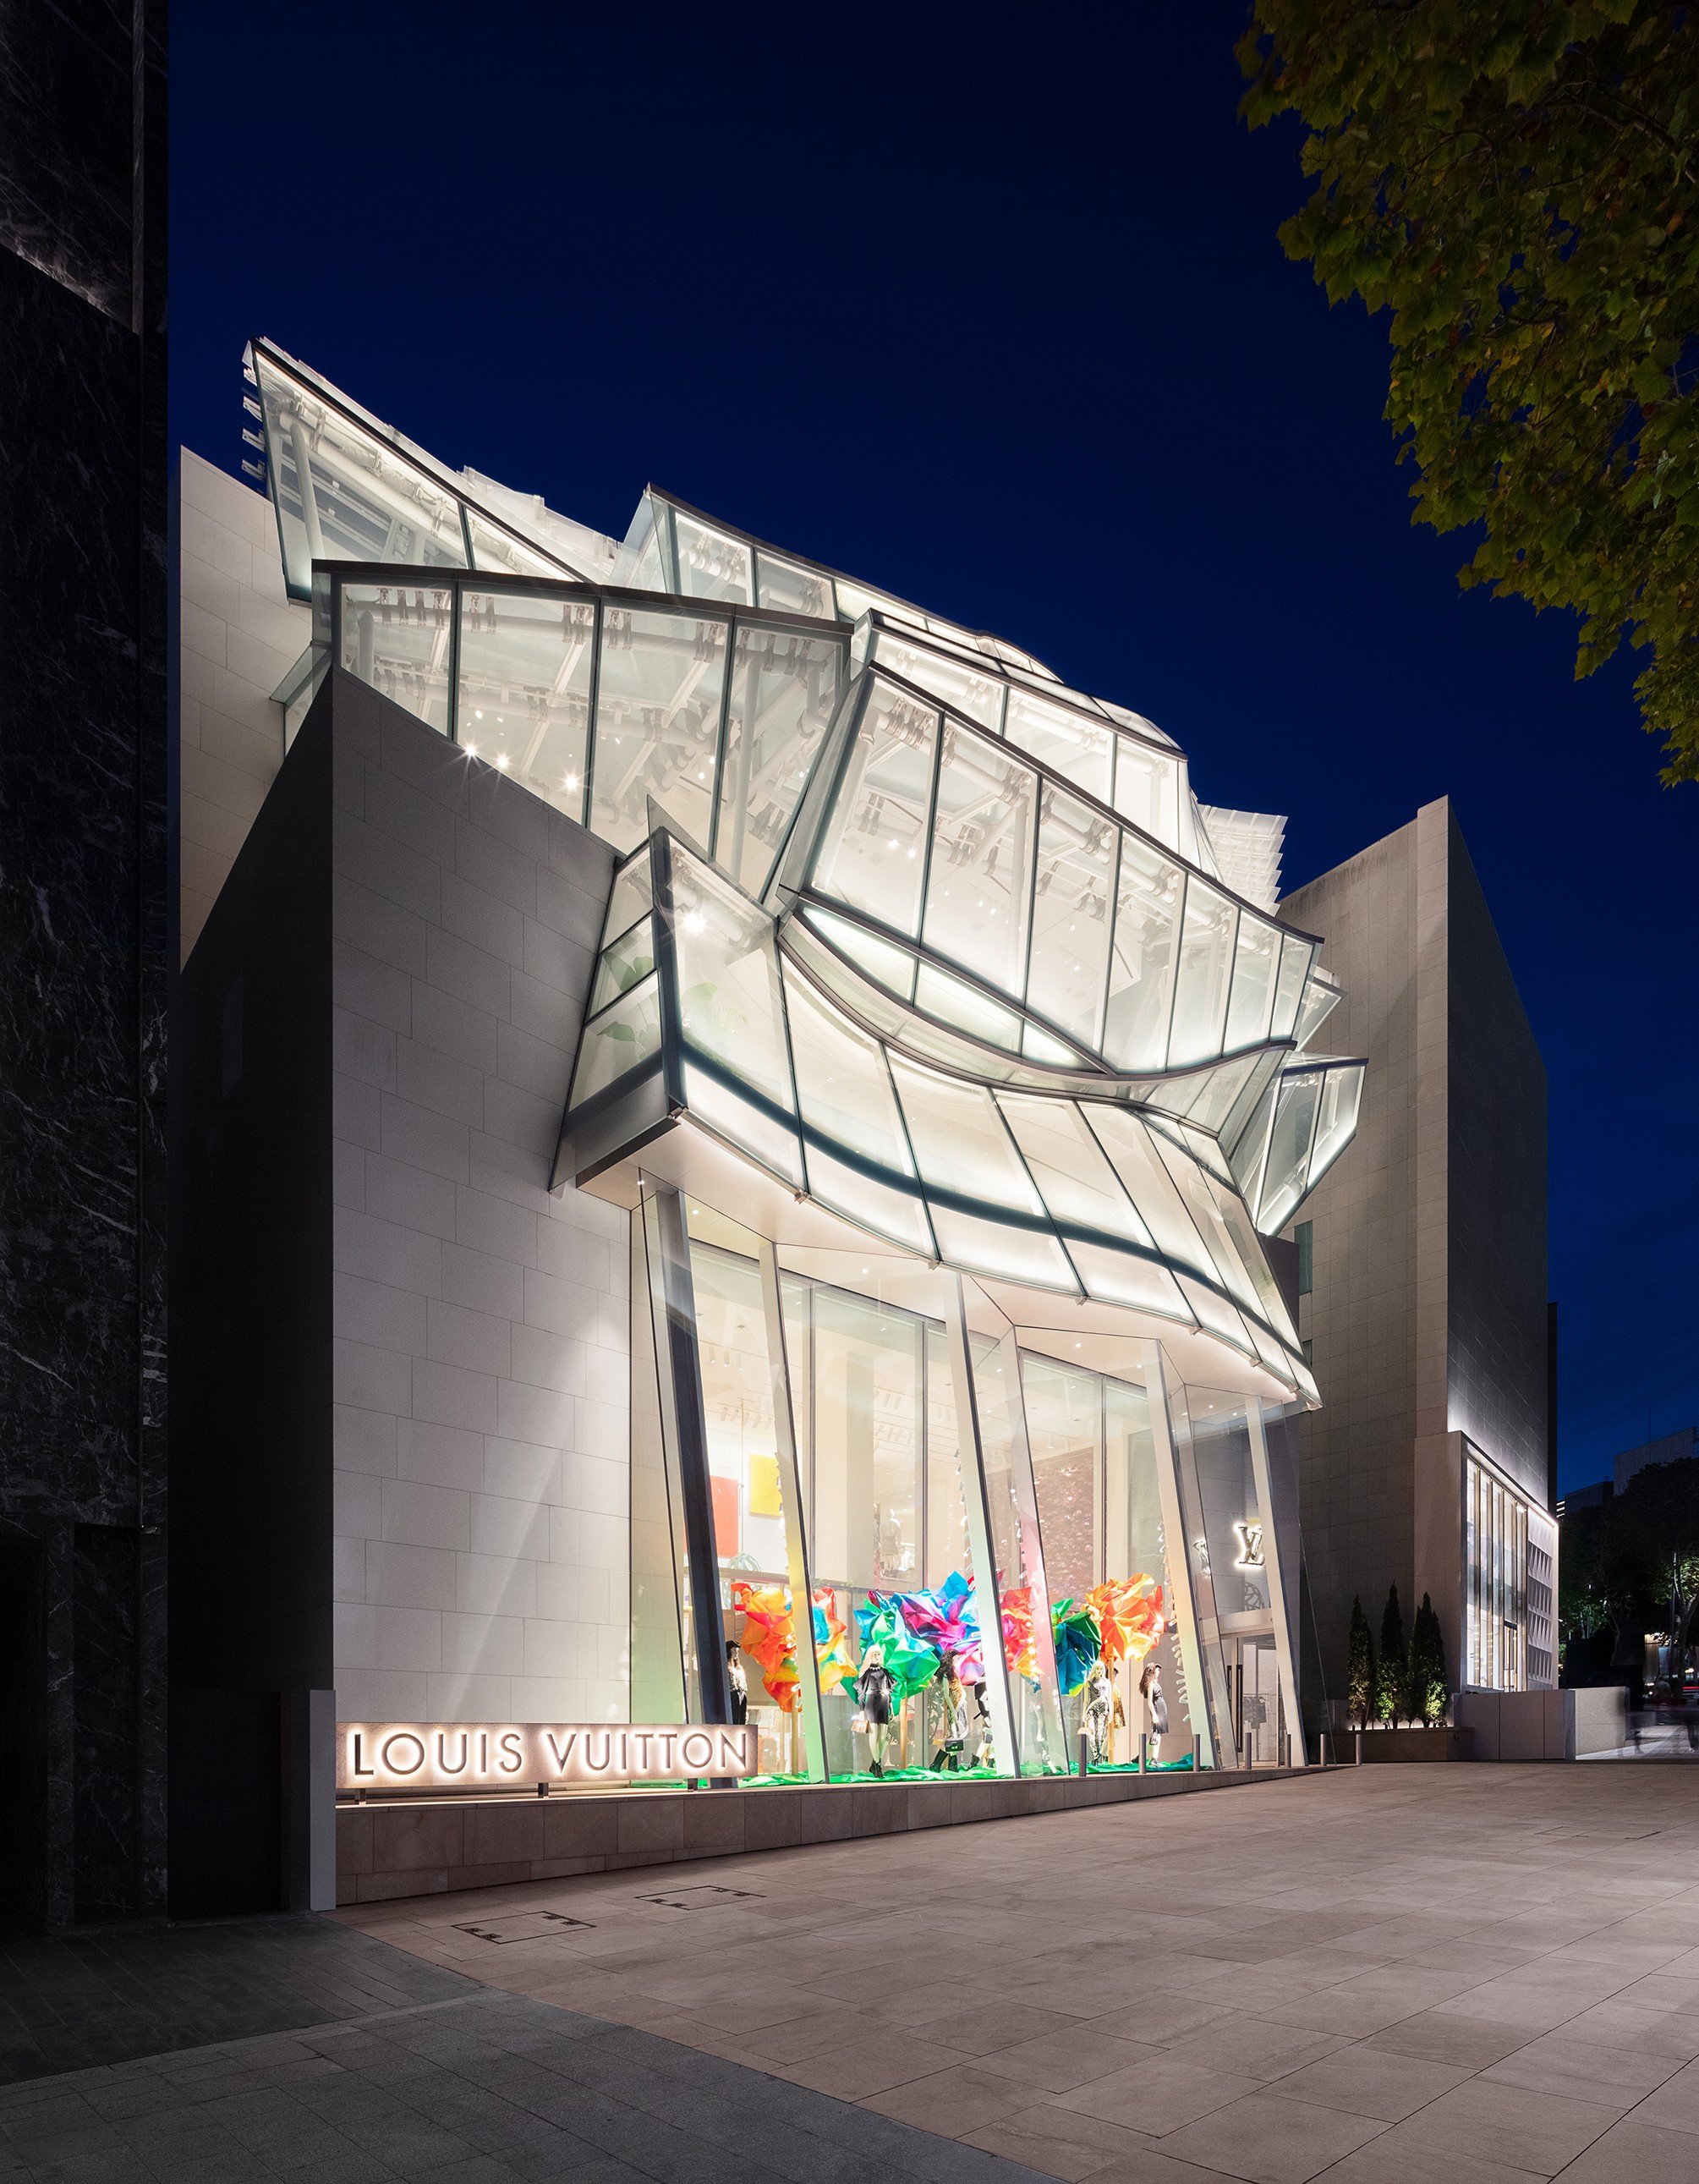 Louis Vuitton’s flagship store in Seoul, South Korea. Its undulating glass facade is the trademark style of Frank Gehry.